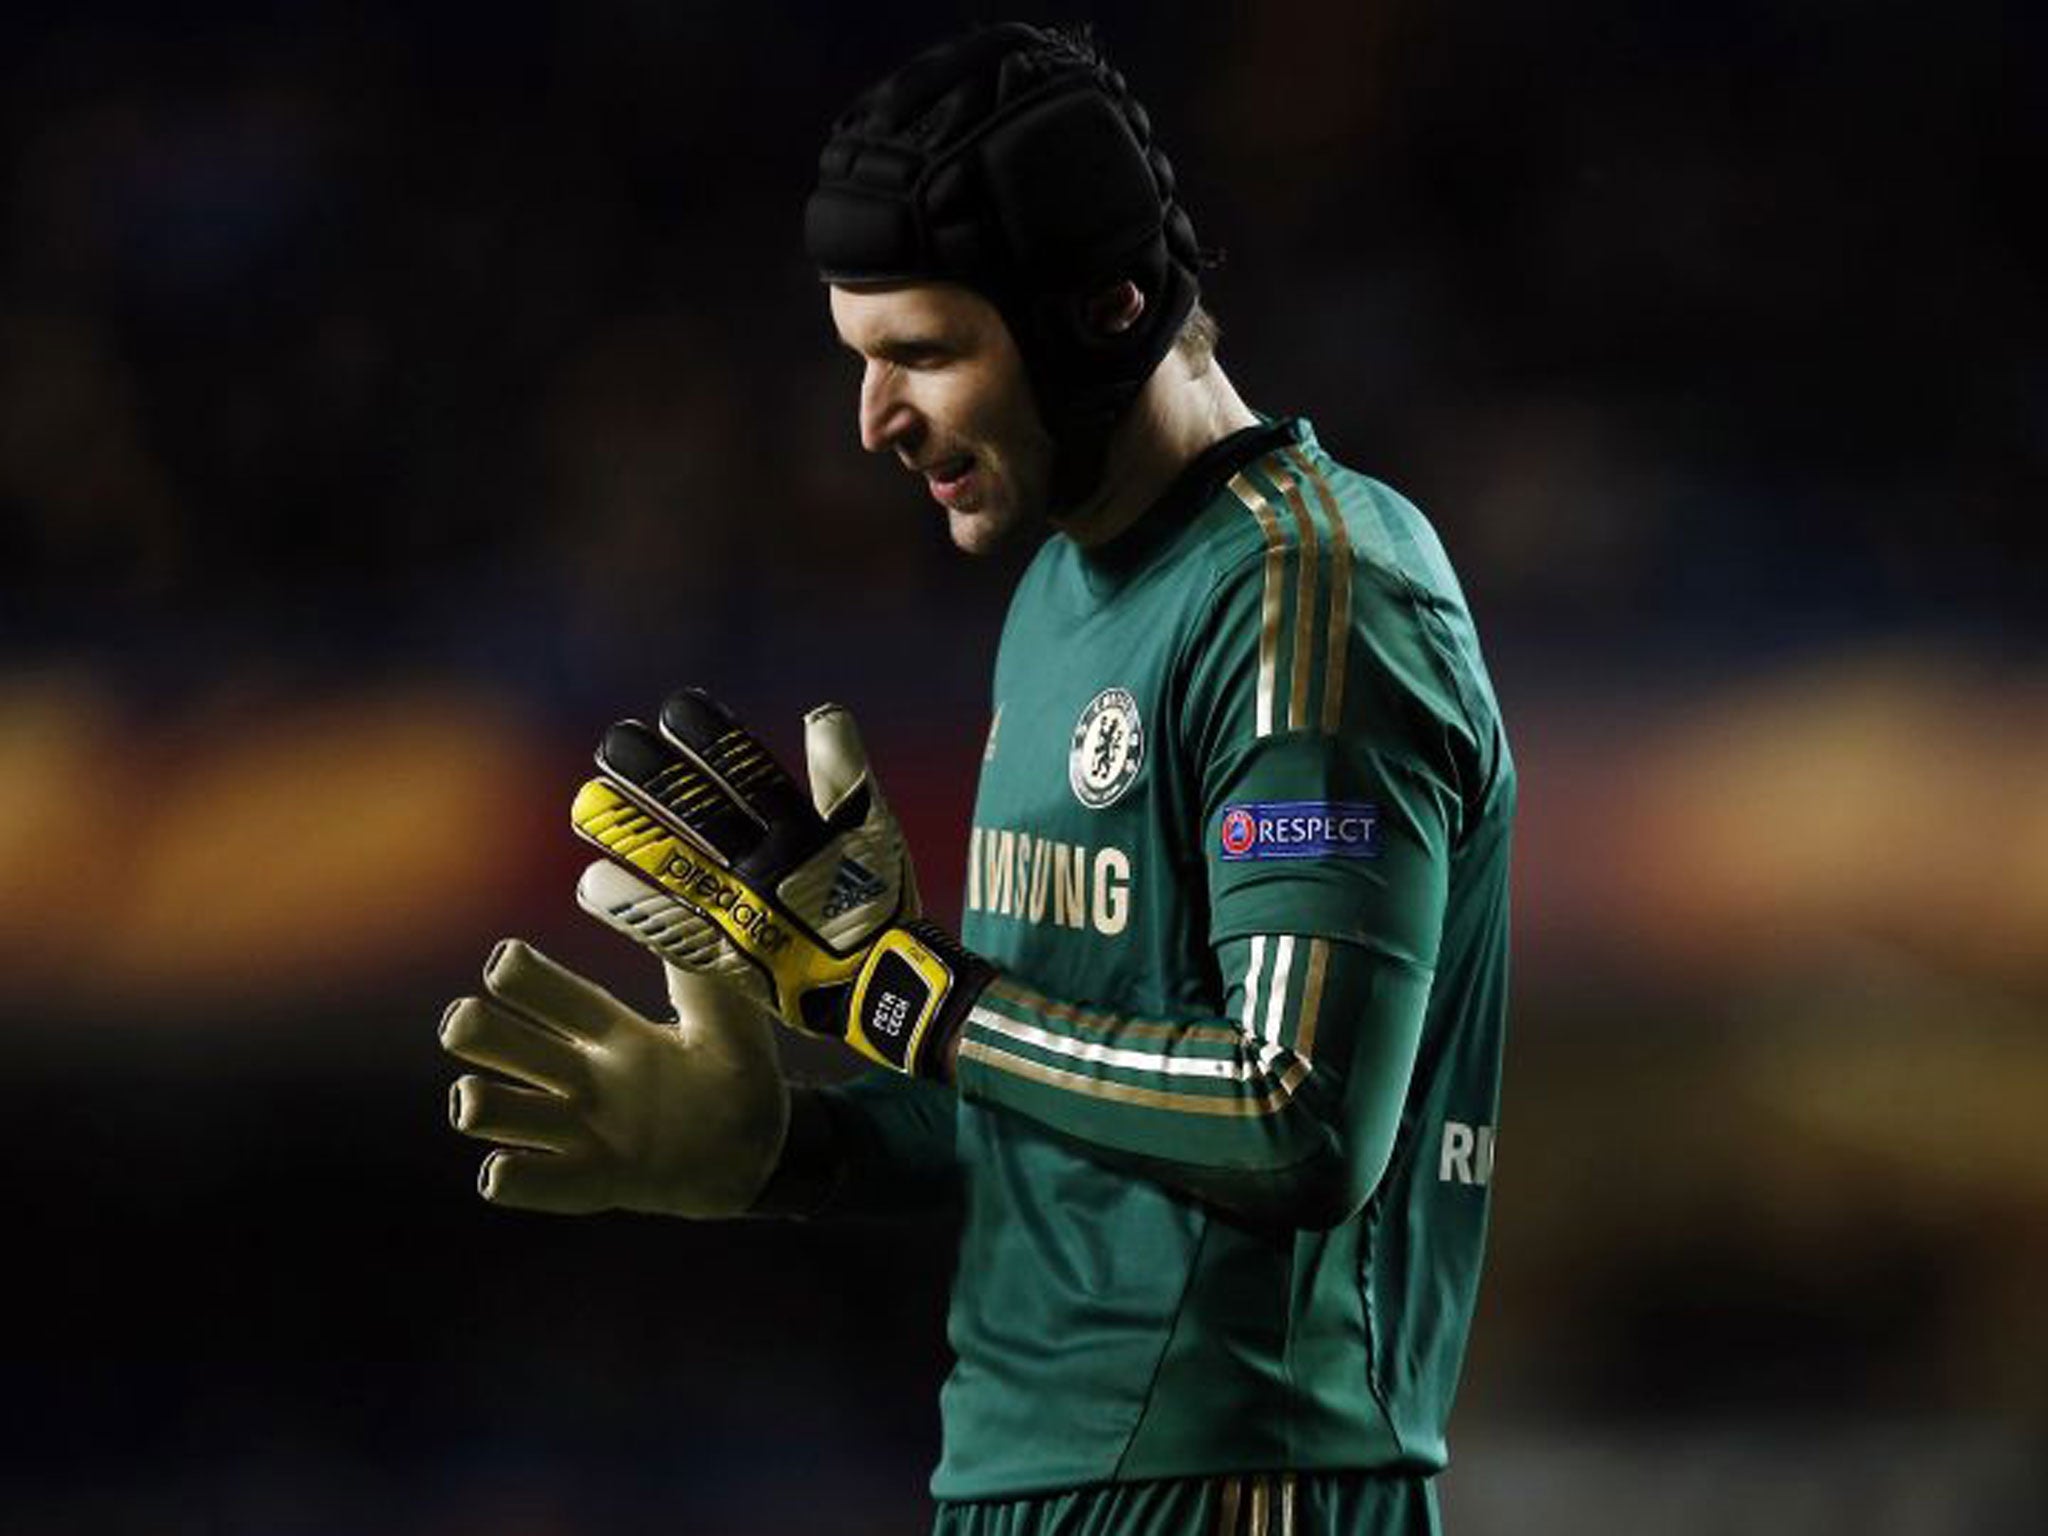 Petr Cech is outspoken on the value of free speech